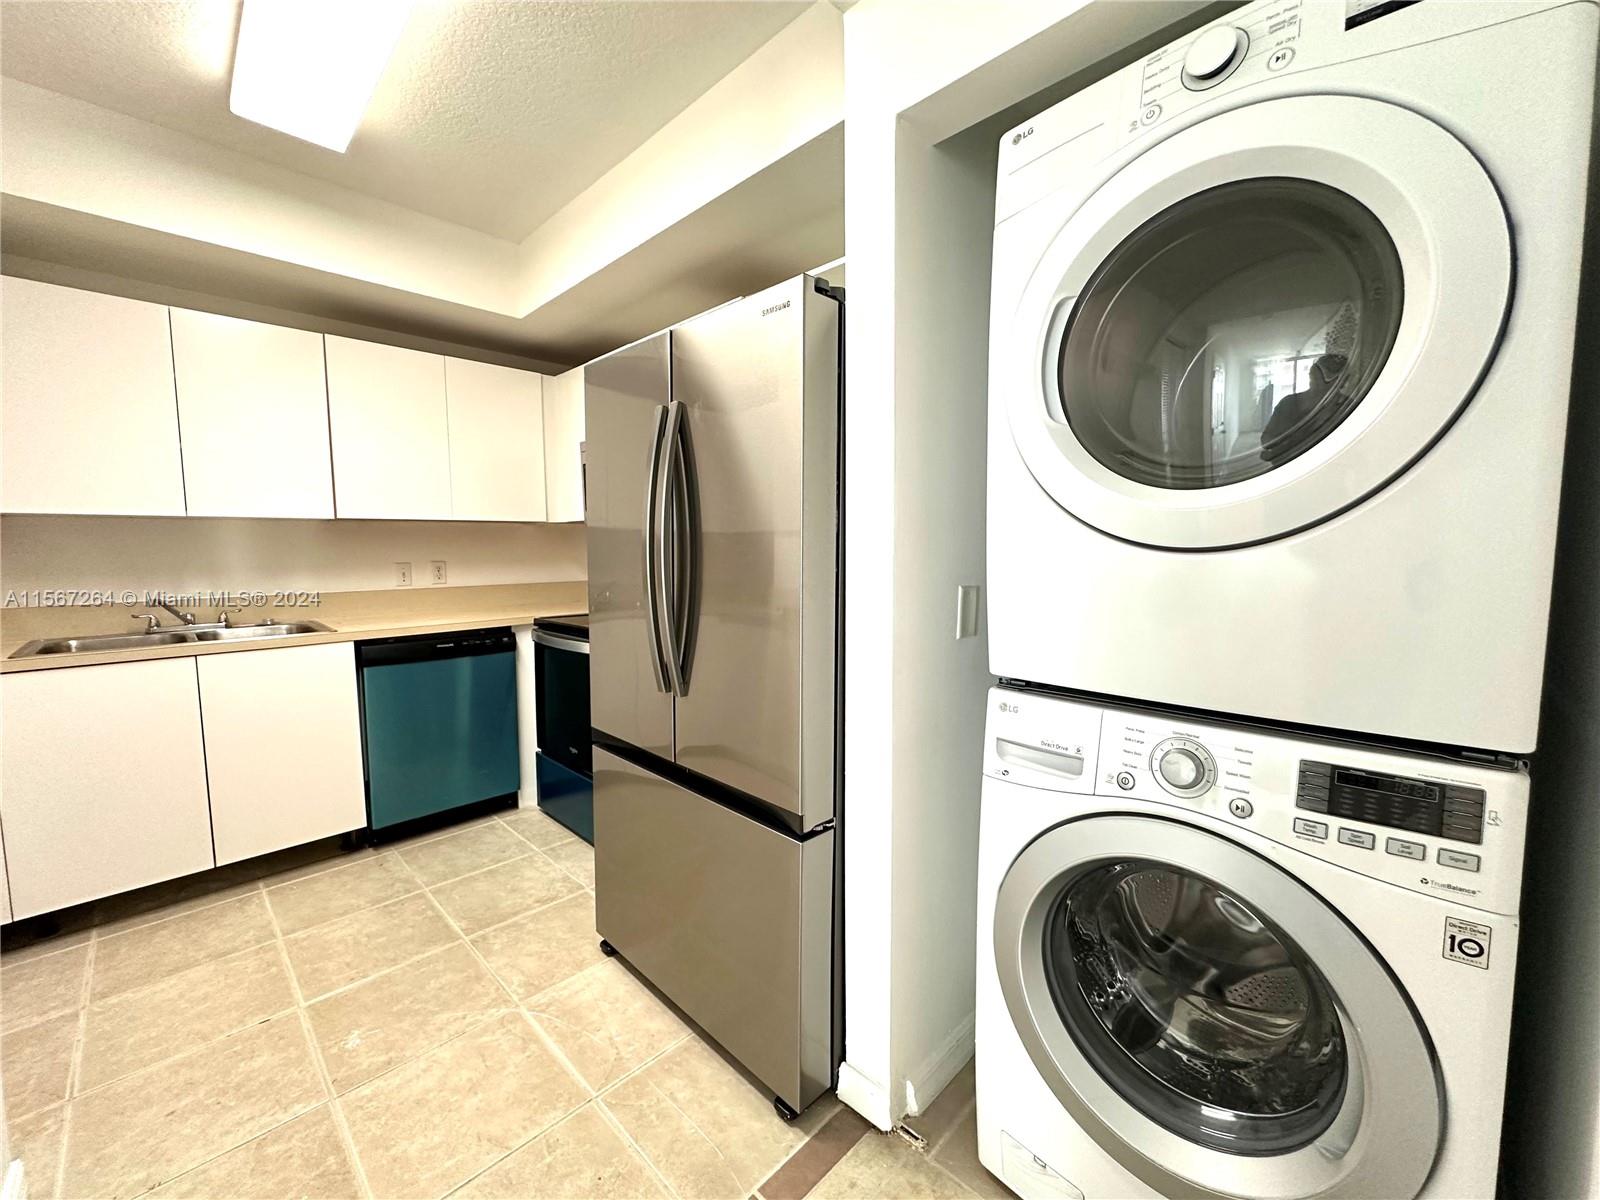 a view of a kitchen with a washer and dryer